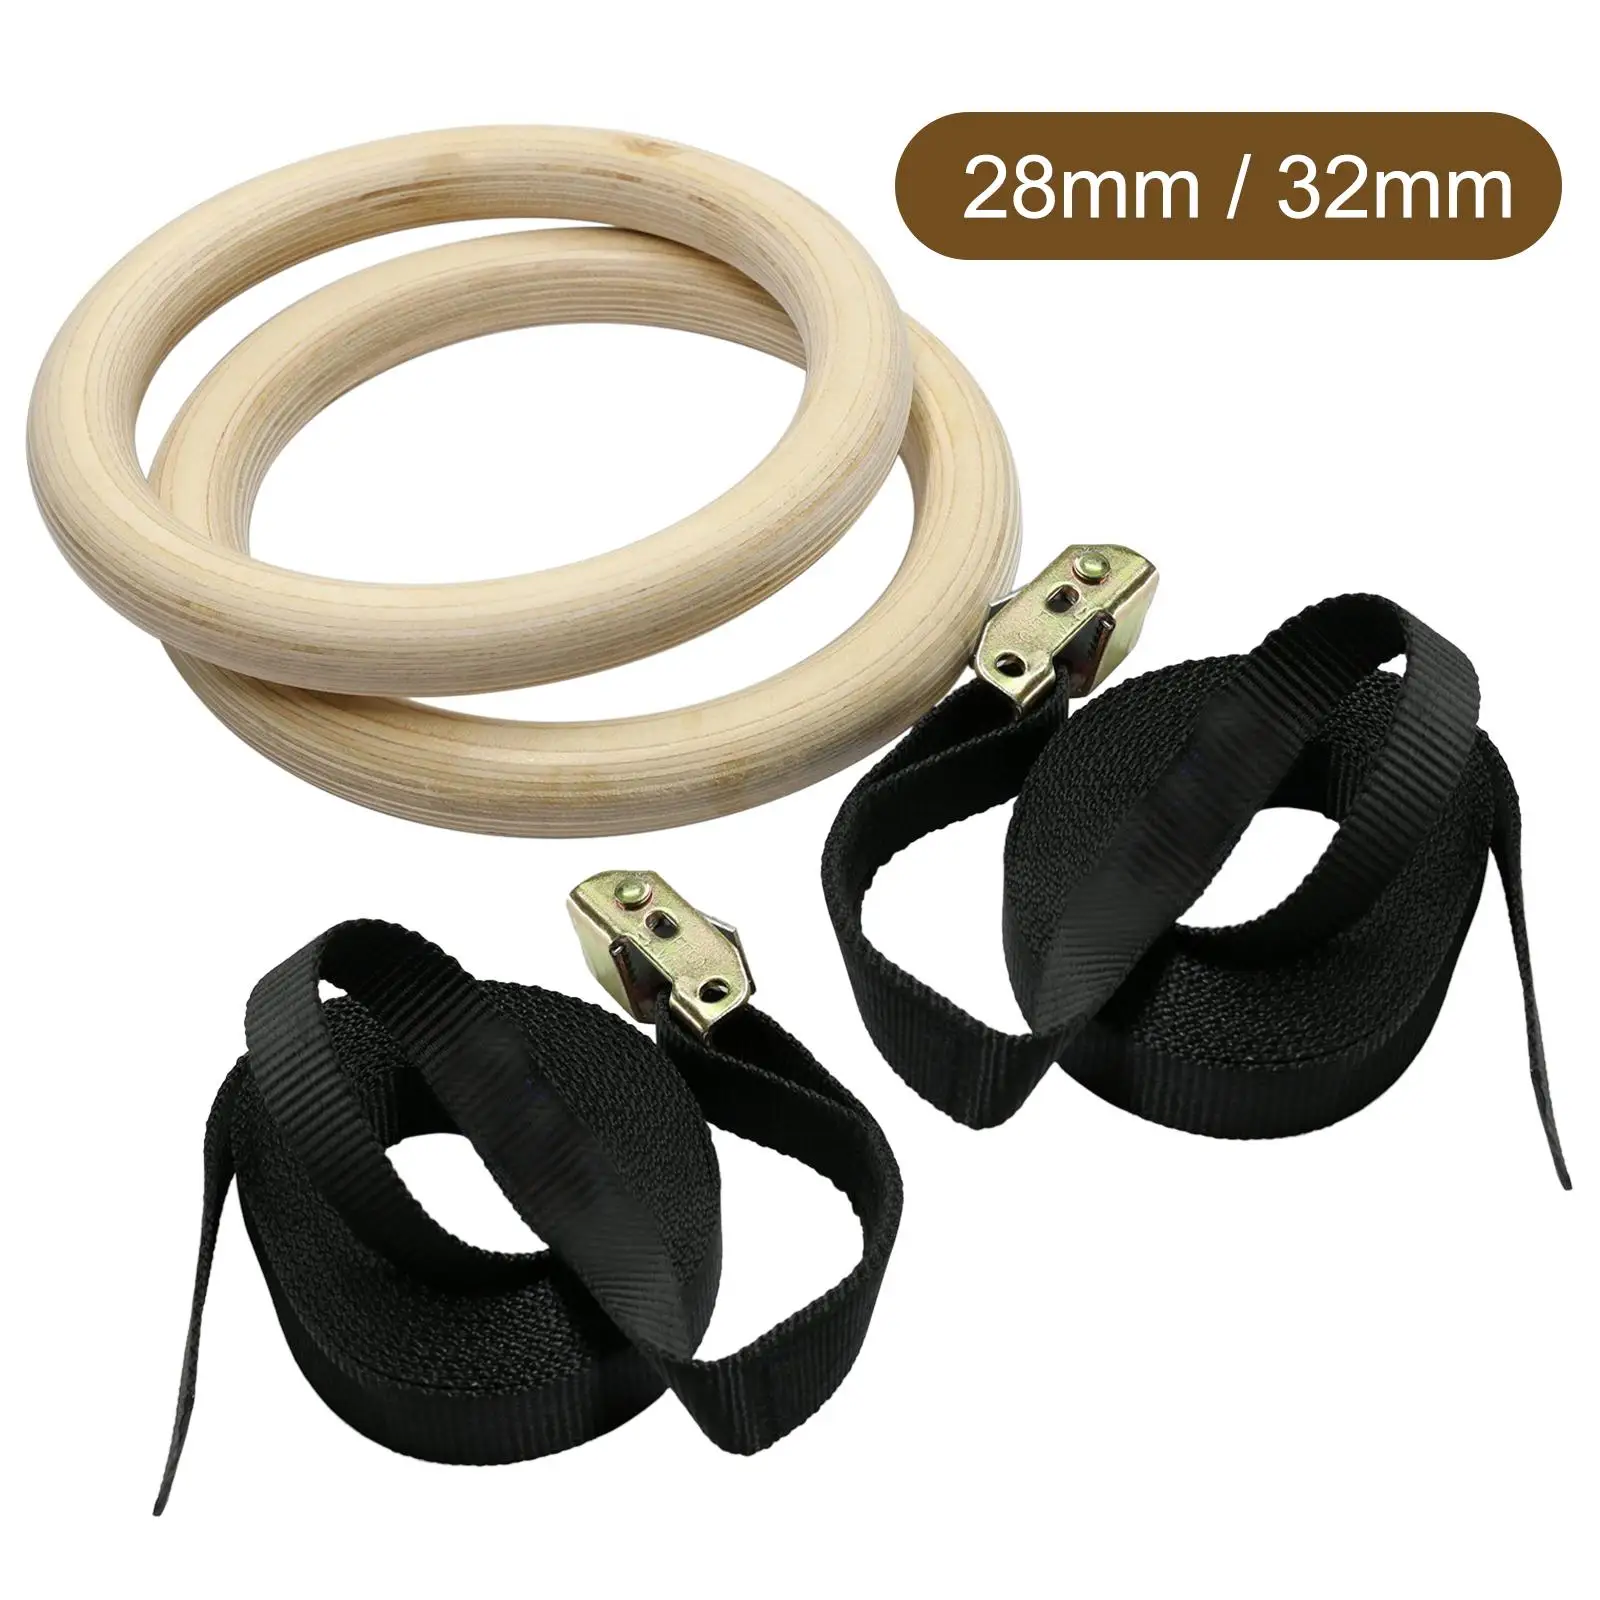 Gymnastics Rings with Buckle Heavy Duty 14.76ft Long Straps Adjustable Training Equipment for Full Body Workout Fitness Home Gym